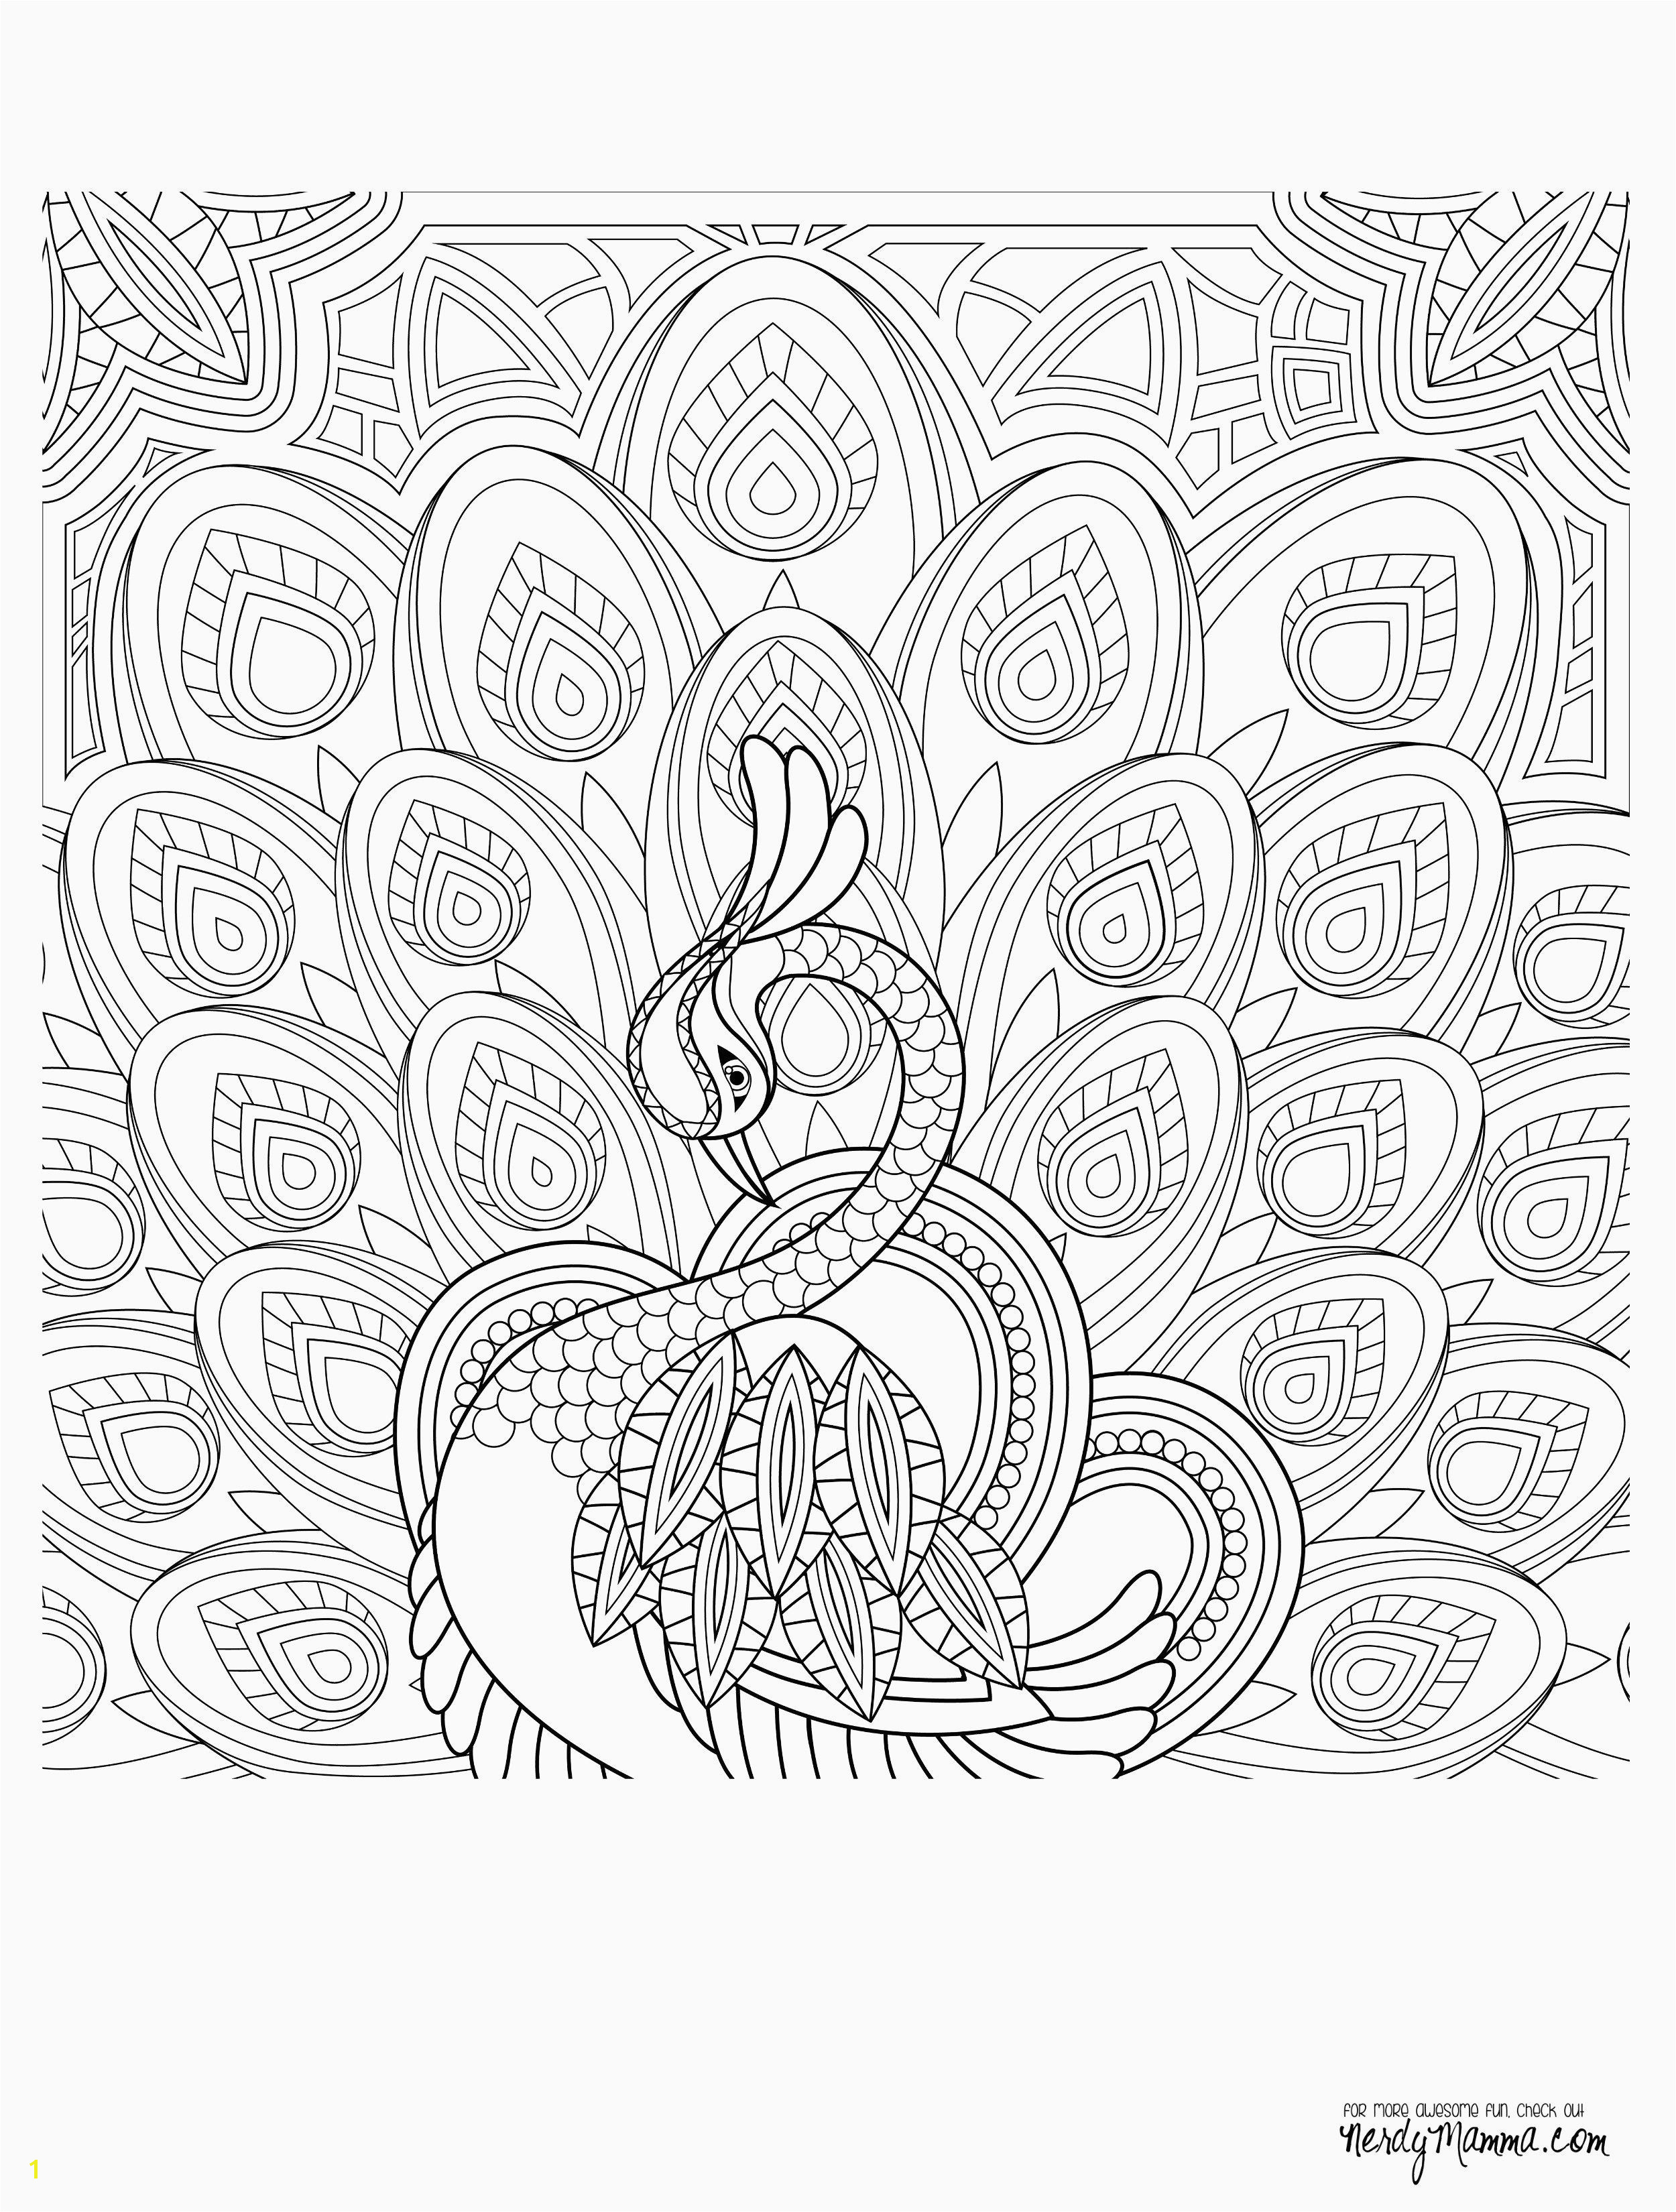 Coloring Pages Free for Adults Free Printable Coloring Pages for Adults Best Awesome Coloring